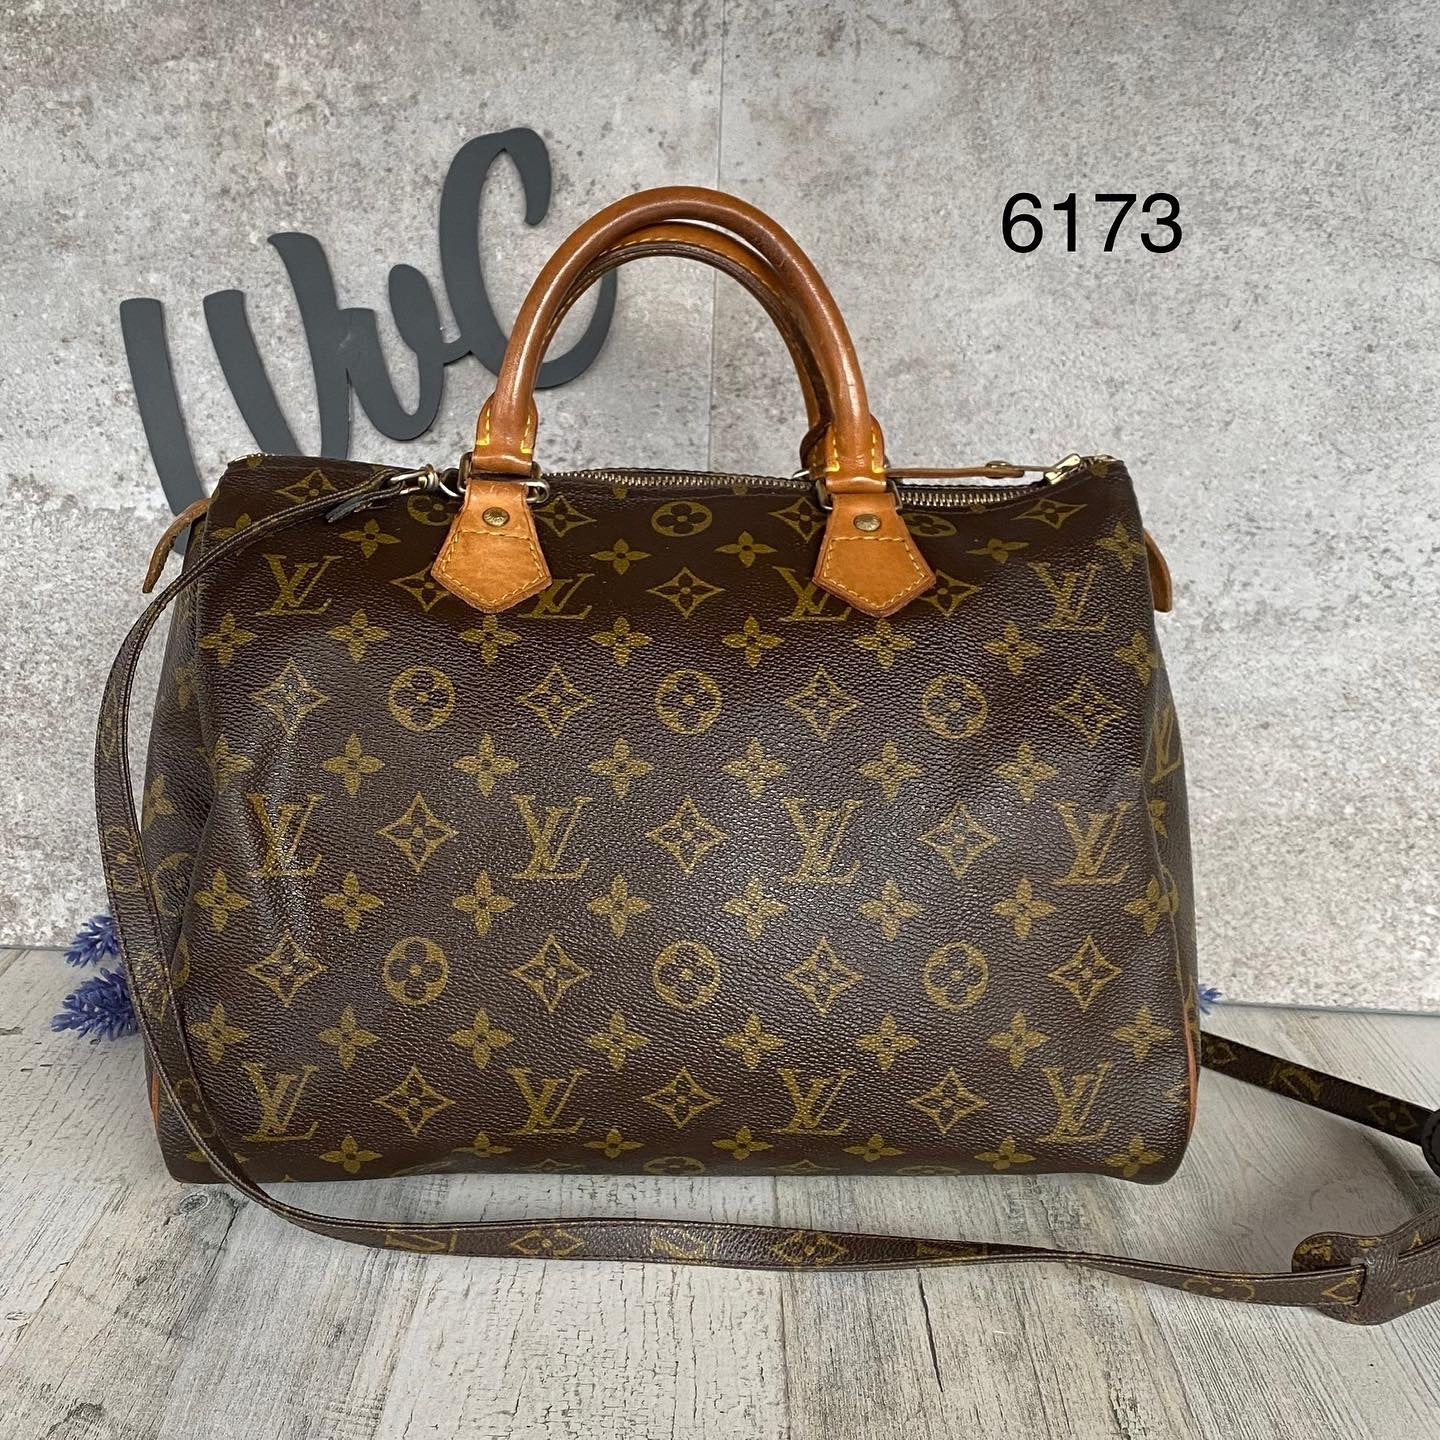 Authentic Pre-Owned Louis Vuitton Speedy 30 202373/1